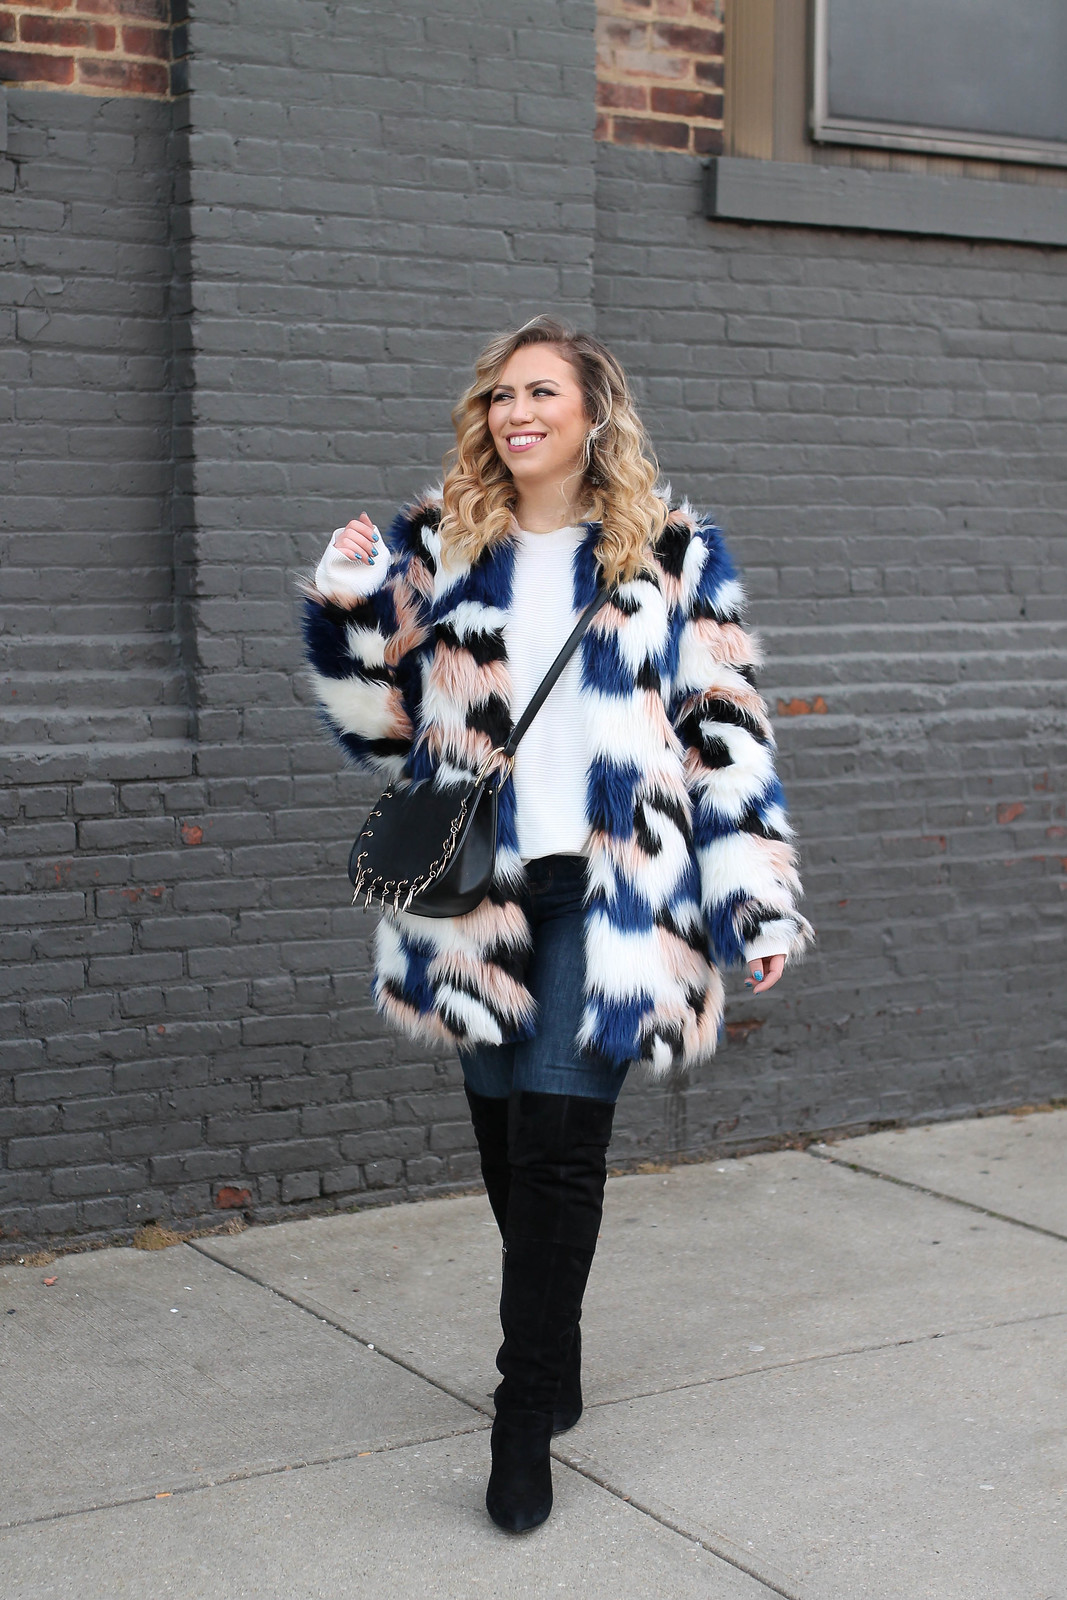 Colorful Faux Fur Winter Coat Old Navy Rockstar Jeans Black Suede OTK Boots Winter Outfit Inspiration